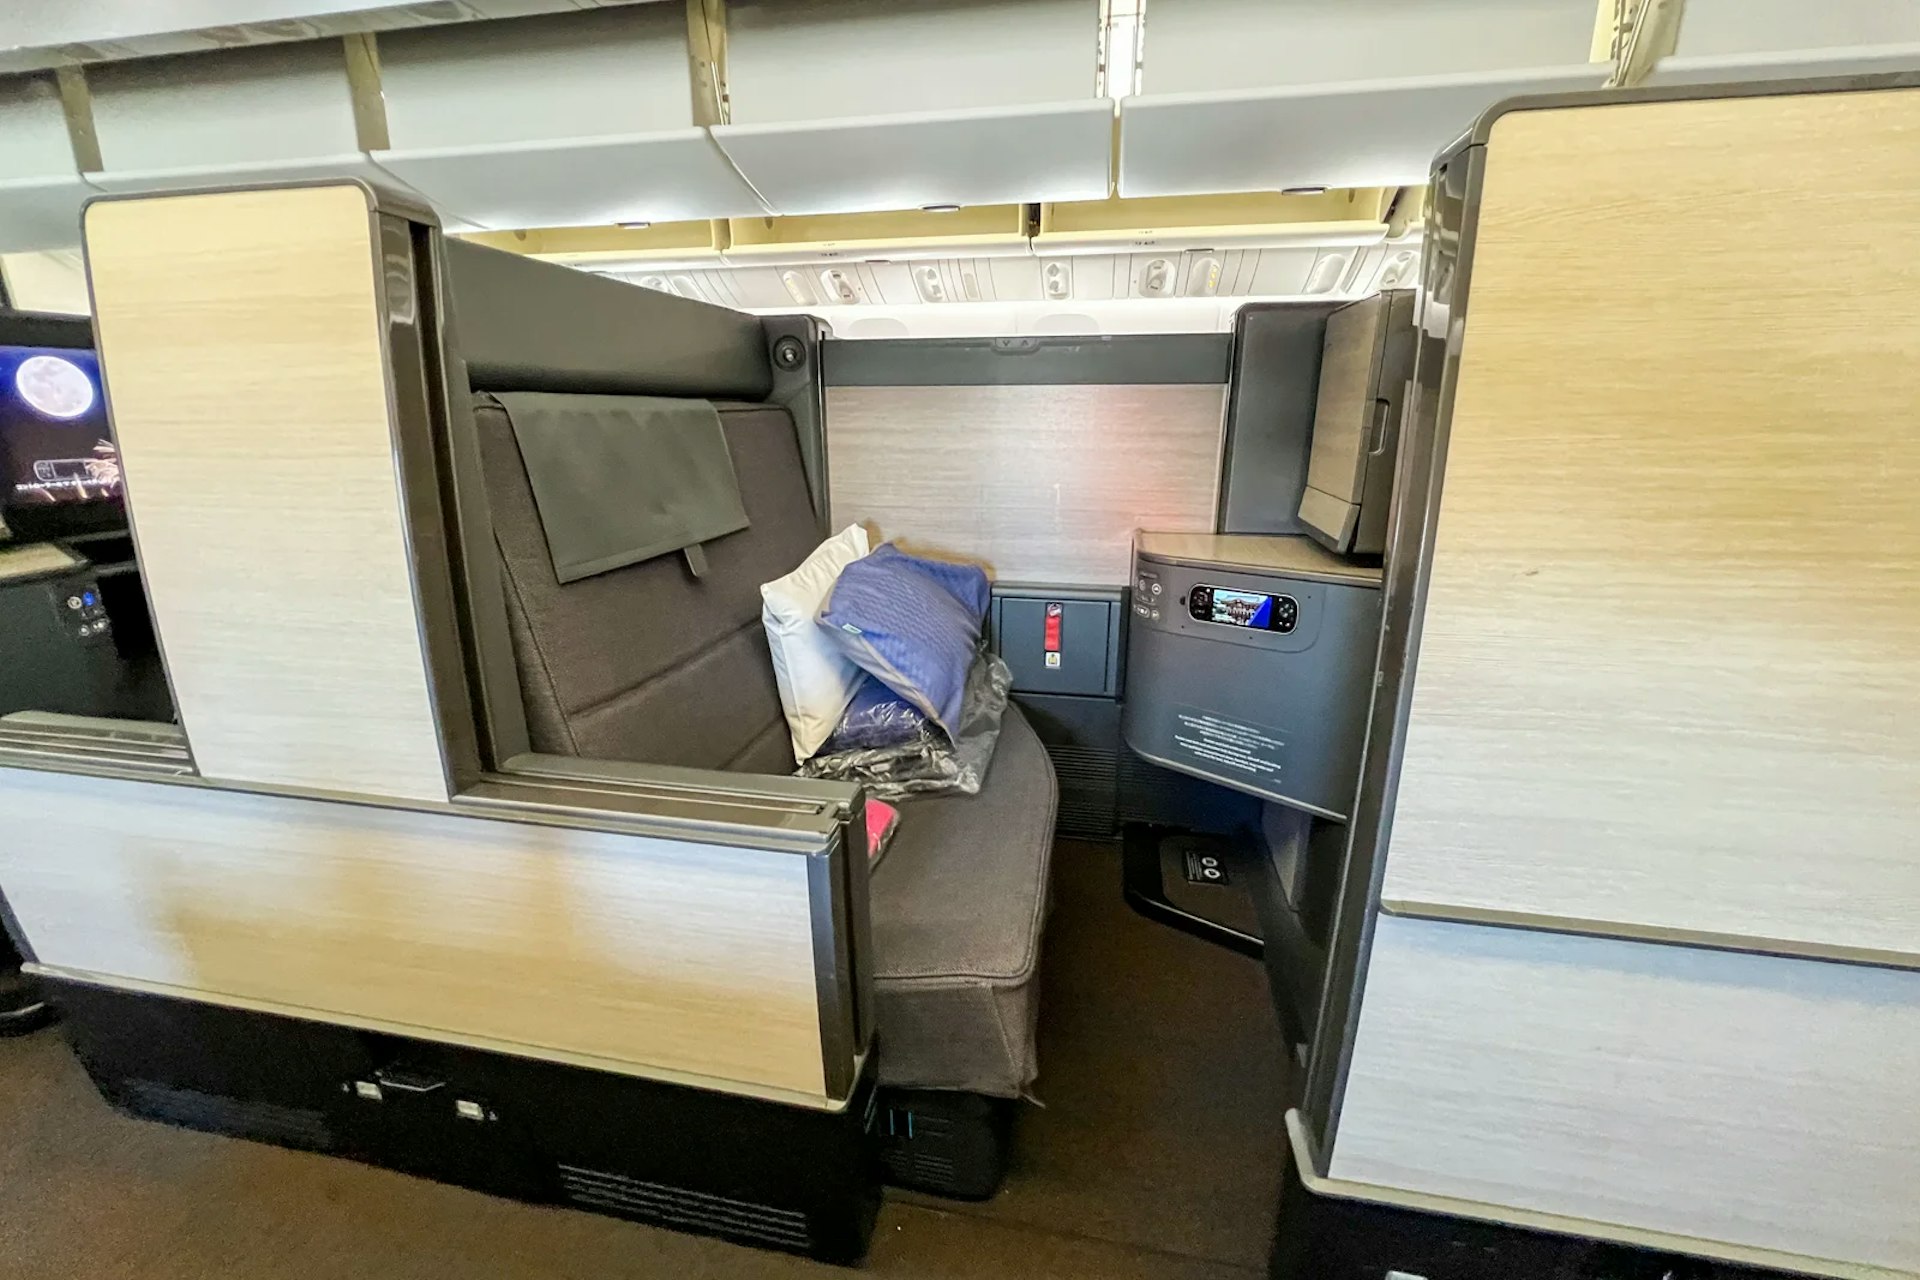 Fly ANA's esteemed “The Room” business class from 100,000 miles round-trip to Singapore